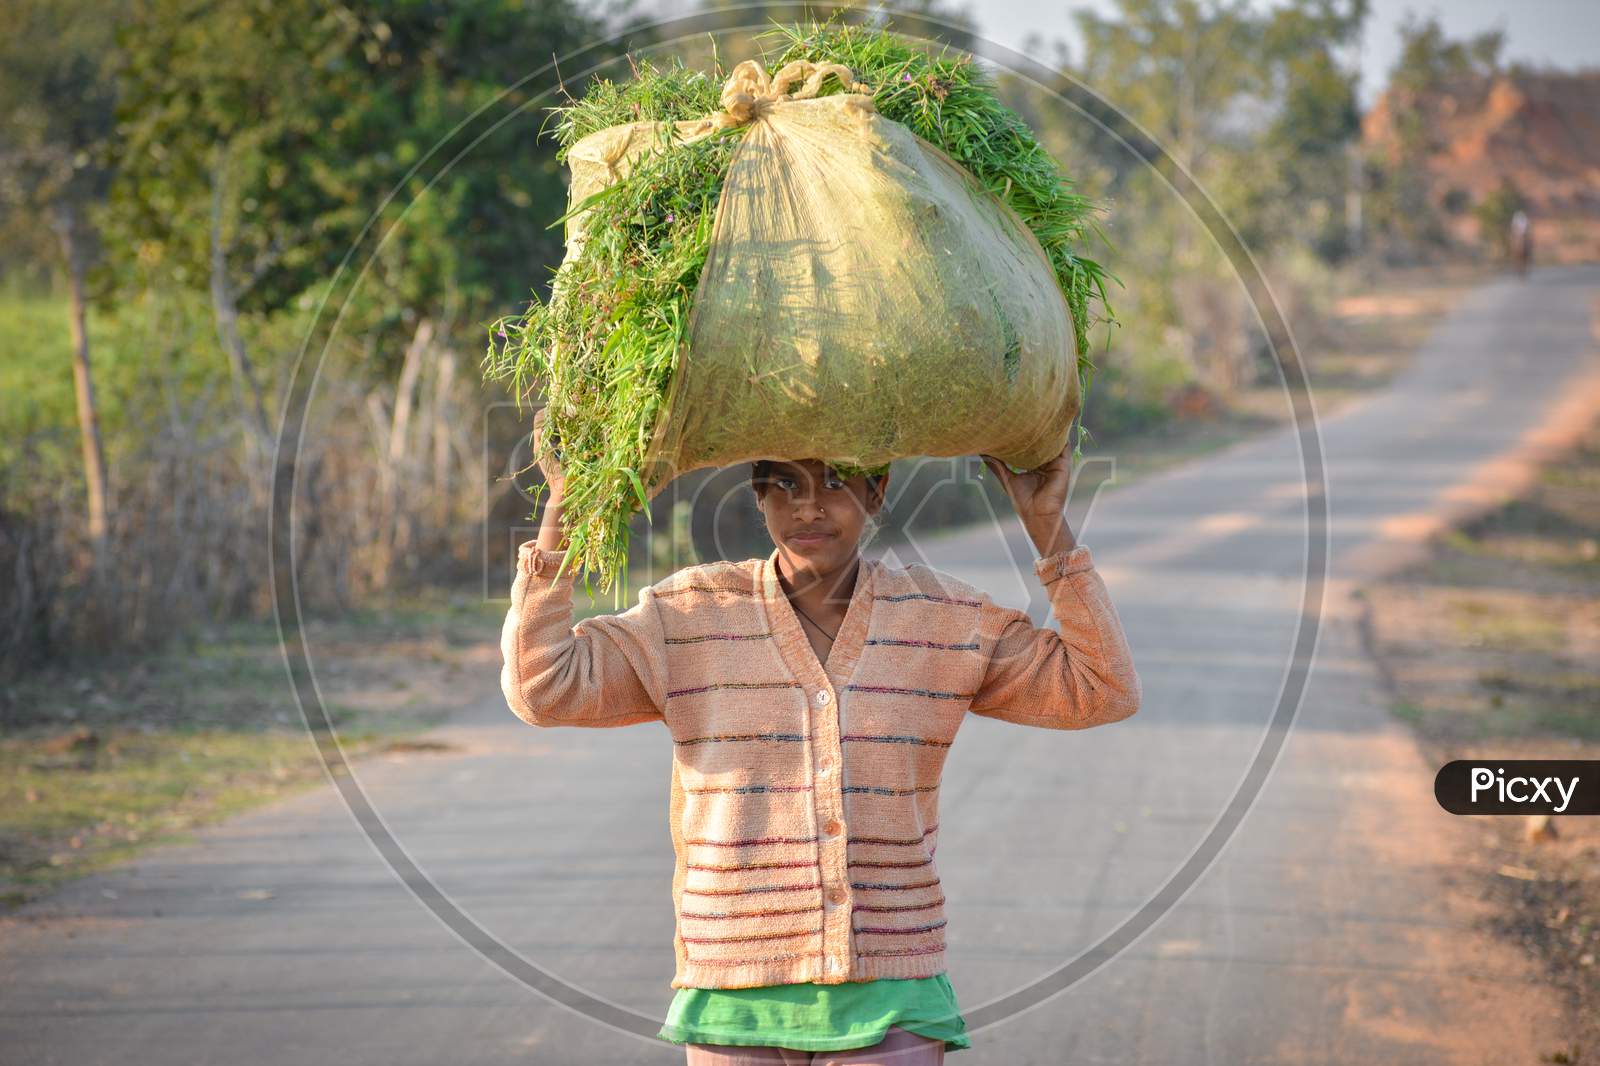 TIKAMGARH, MADHYA PRADESH, INDIA - FEBRUARY 11, 2020: Indian girl carrying grass on head at the road, An Indian rural scene.